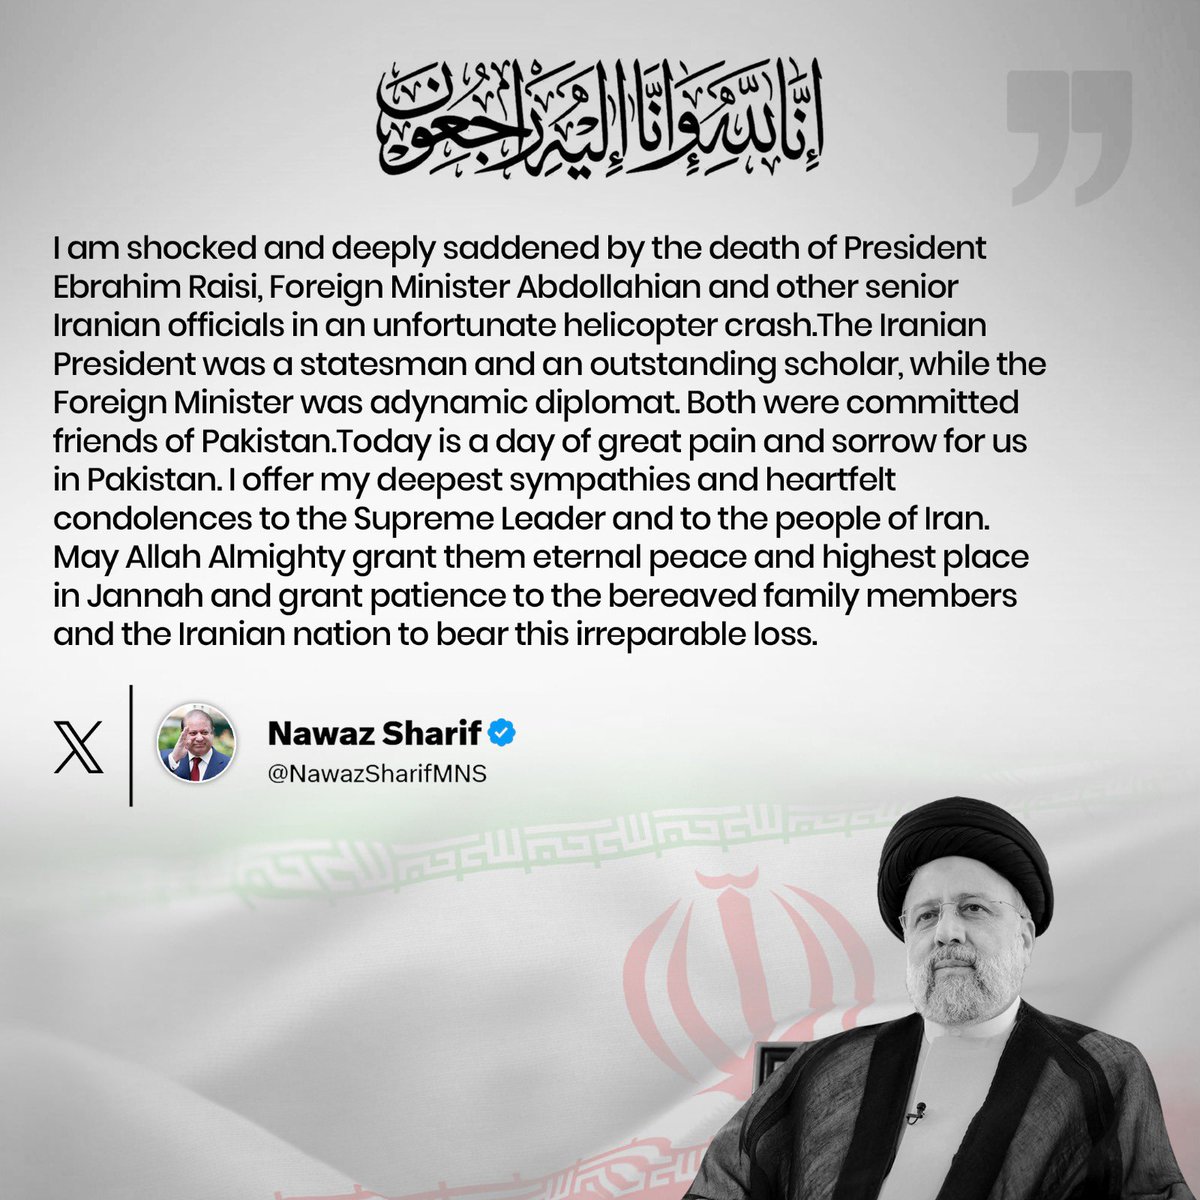 Quaid Nawaz Sharif is shocked and deeply saddened by the death of President Ebrahim Raisi, Foreign Minister Abdollahian and other senior Iranian officials in an unfortunate helicopter crash.